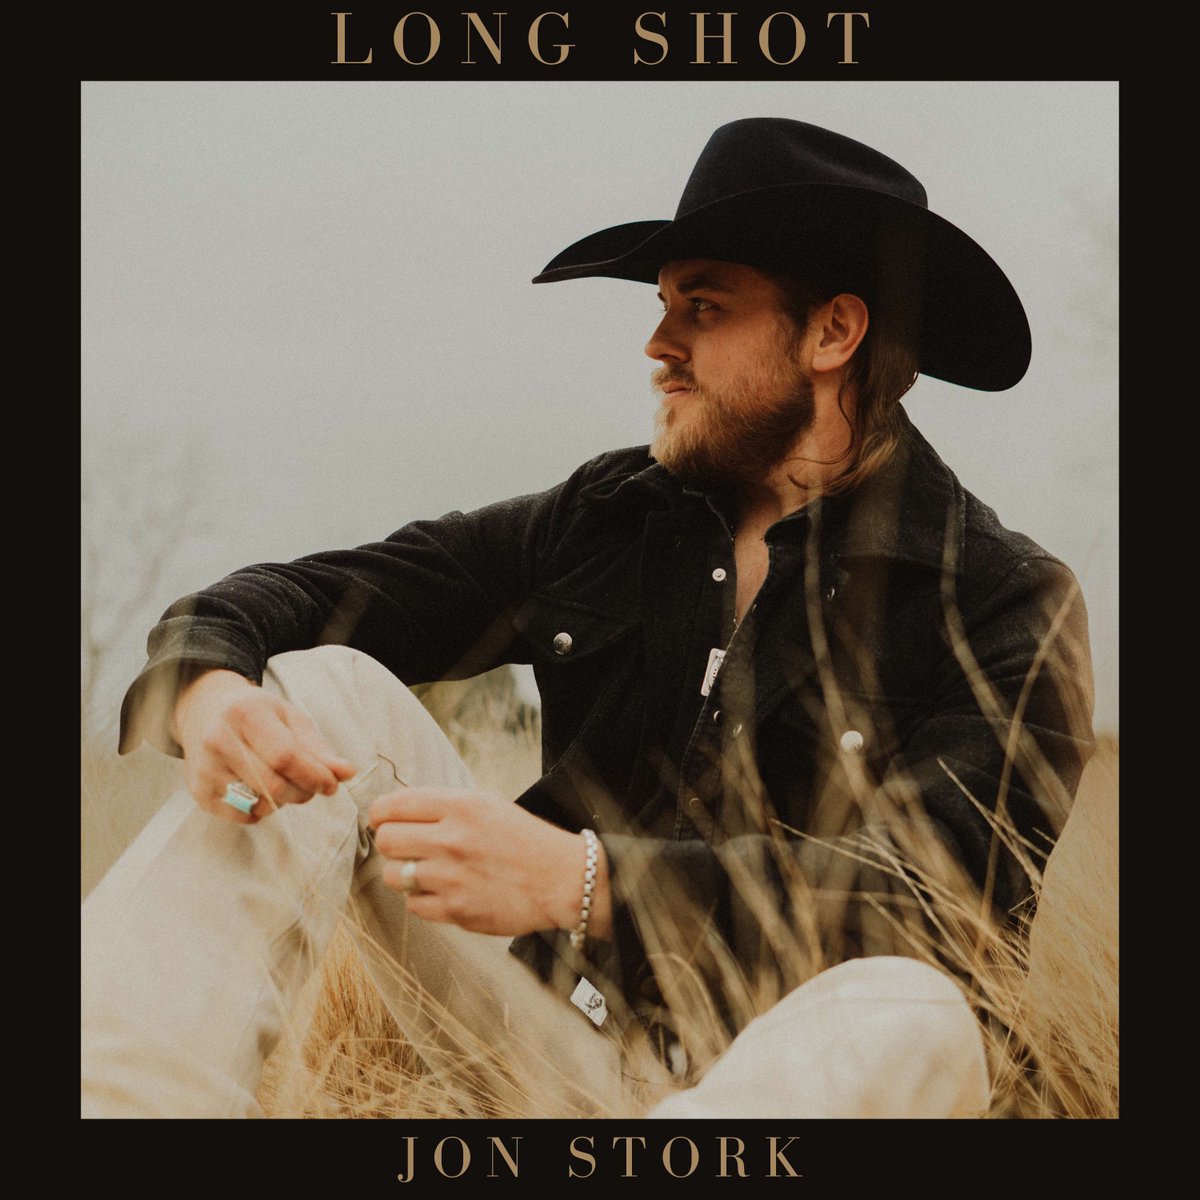 'LONG SHOT' is available everywhere you listen to music! It's been awhile since I've released a love song, and this one means a lot to me. Listen now at ffm.bio/jonstork